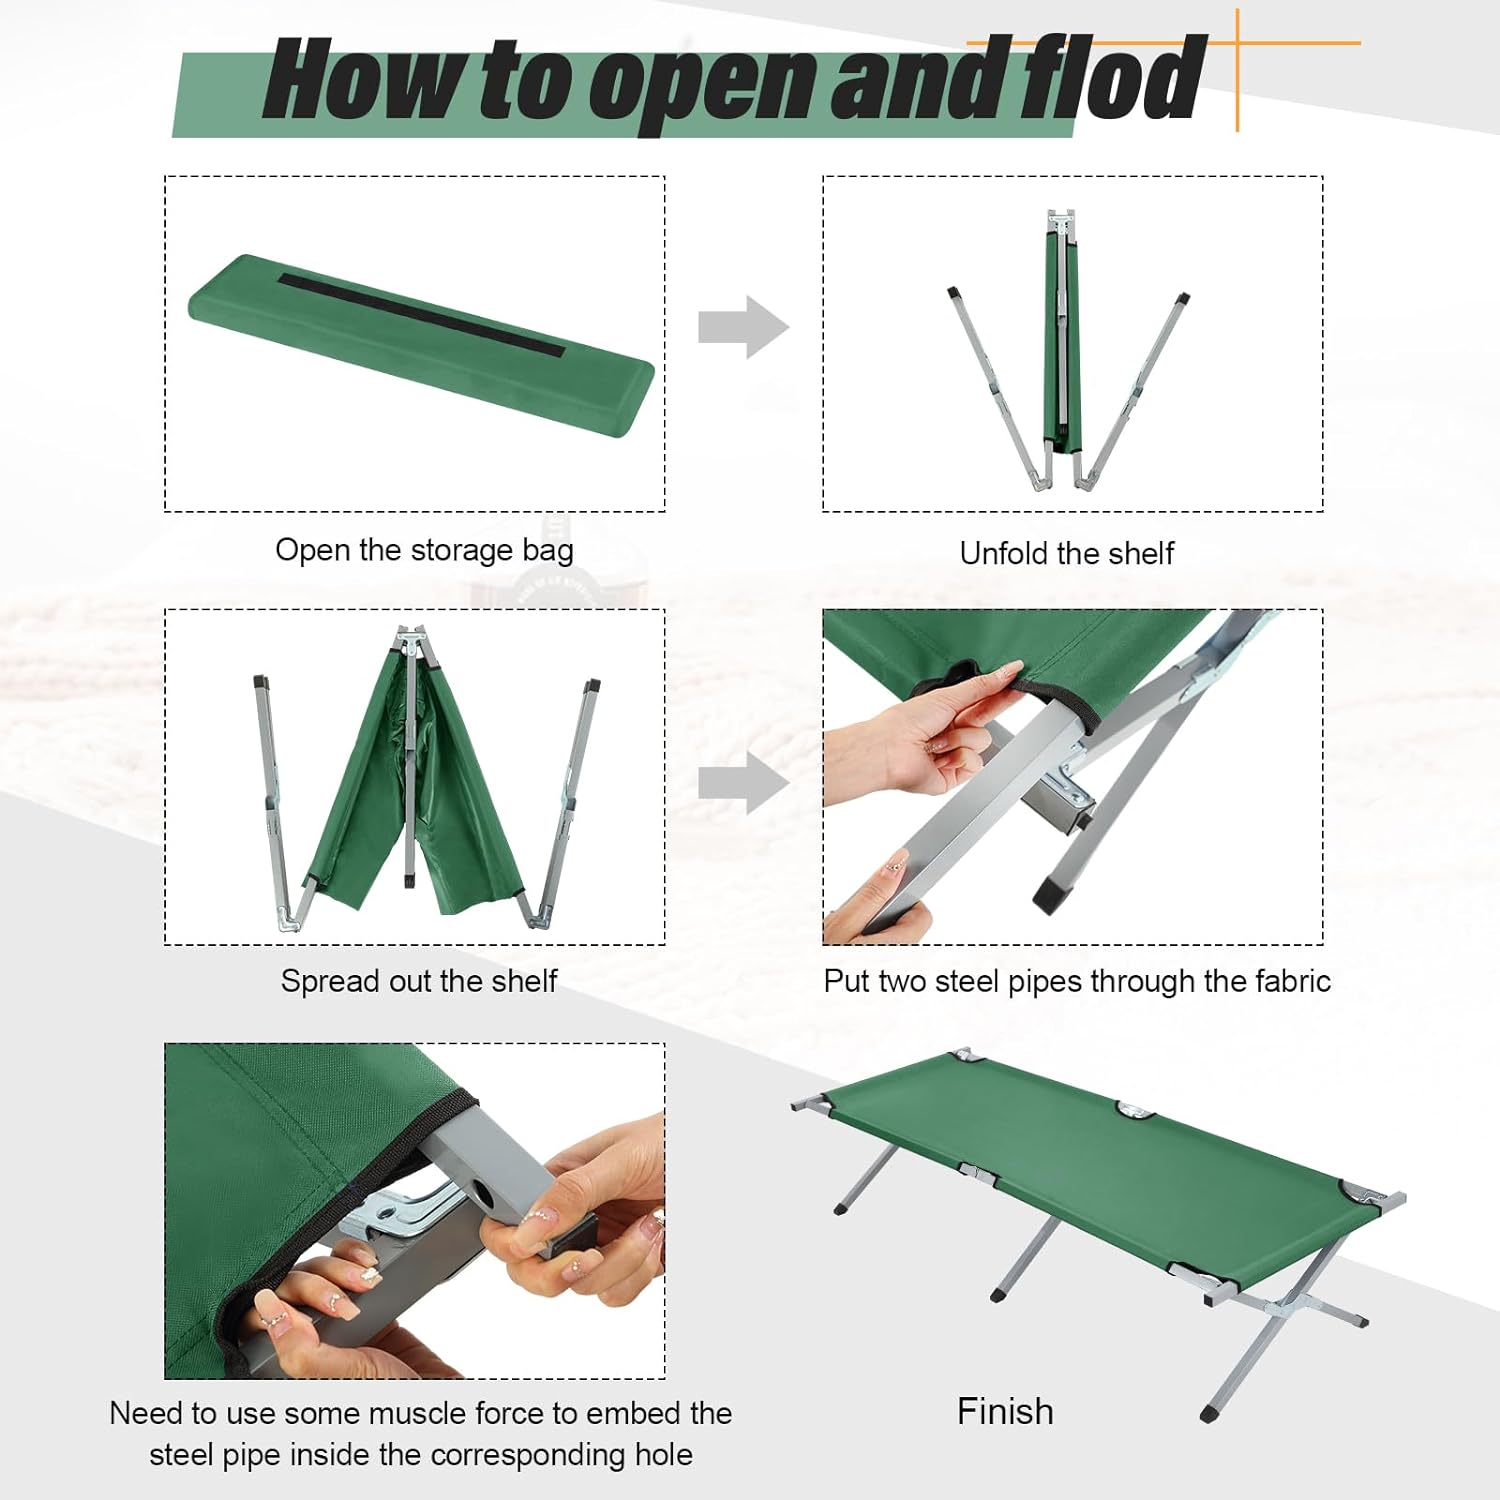 Camping Stretchers Camping Bed Folding Bed Portable Bed X 2